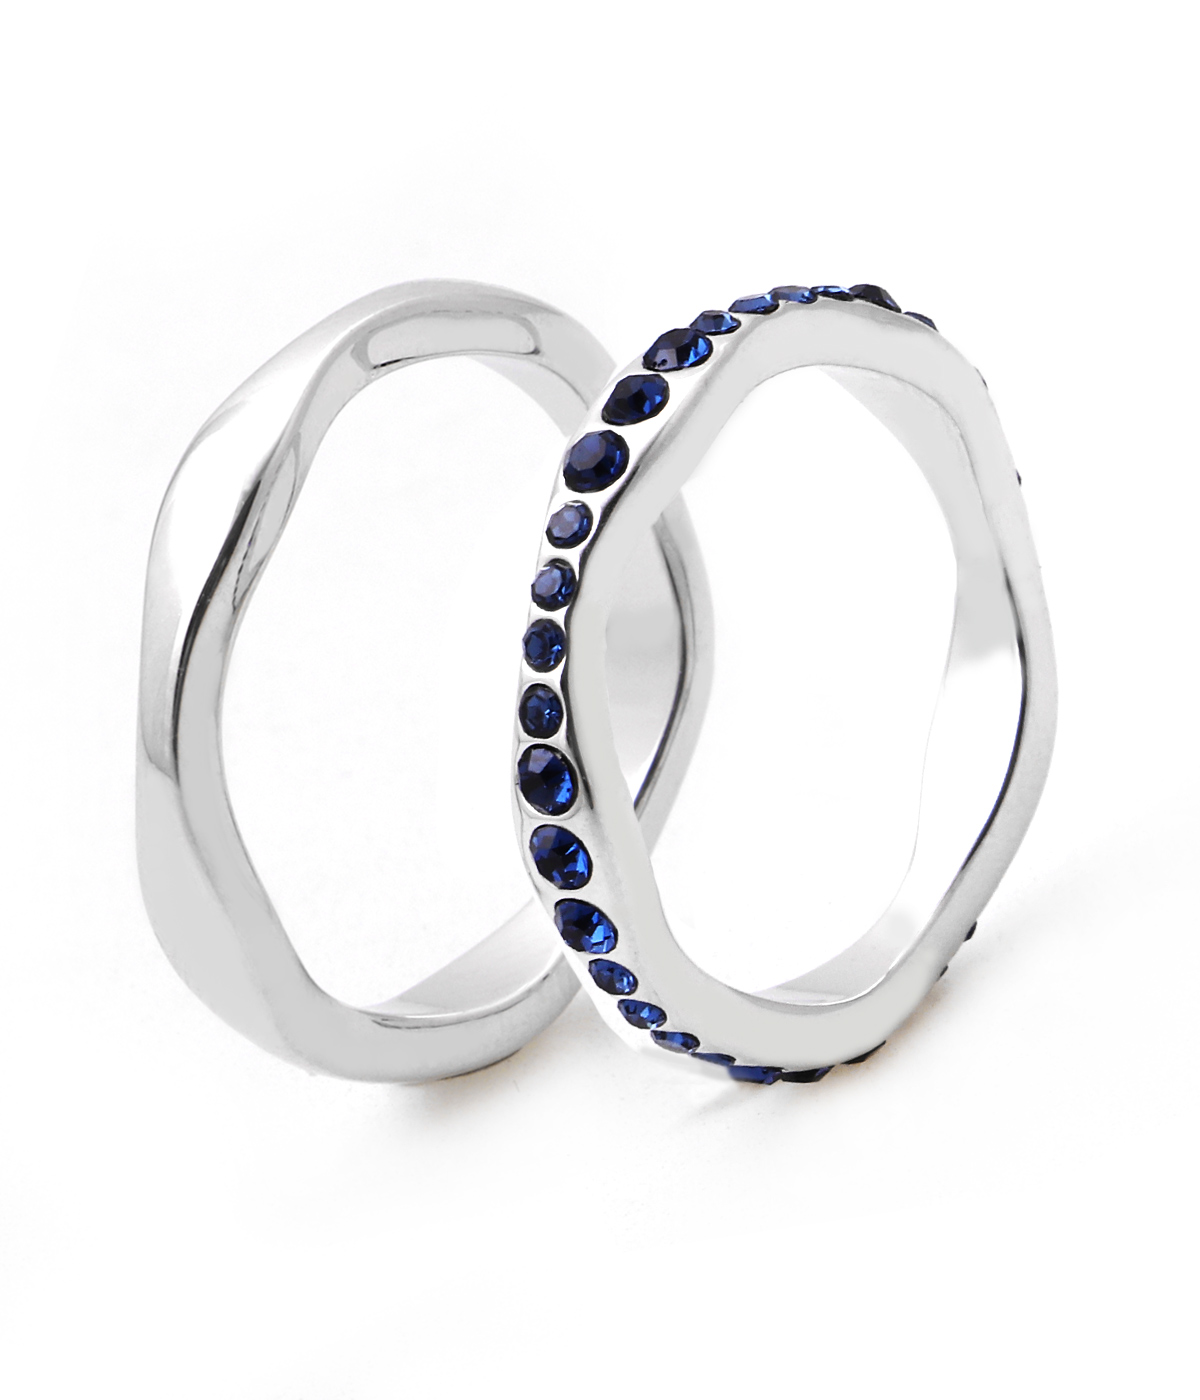 FLOW-Blue -latest RING,Band Ring design 2021